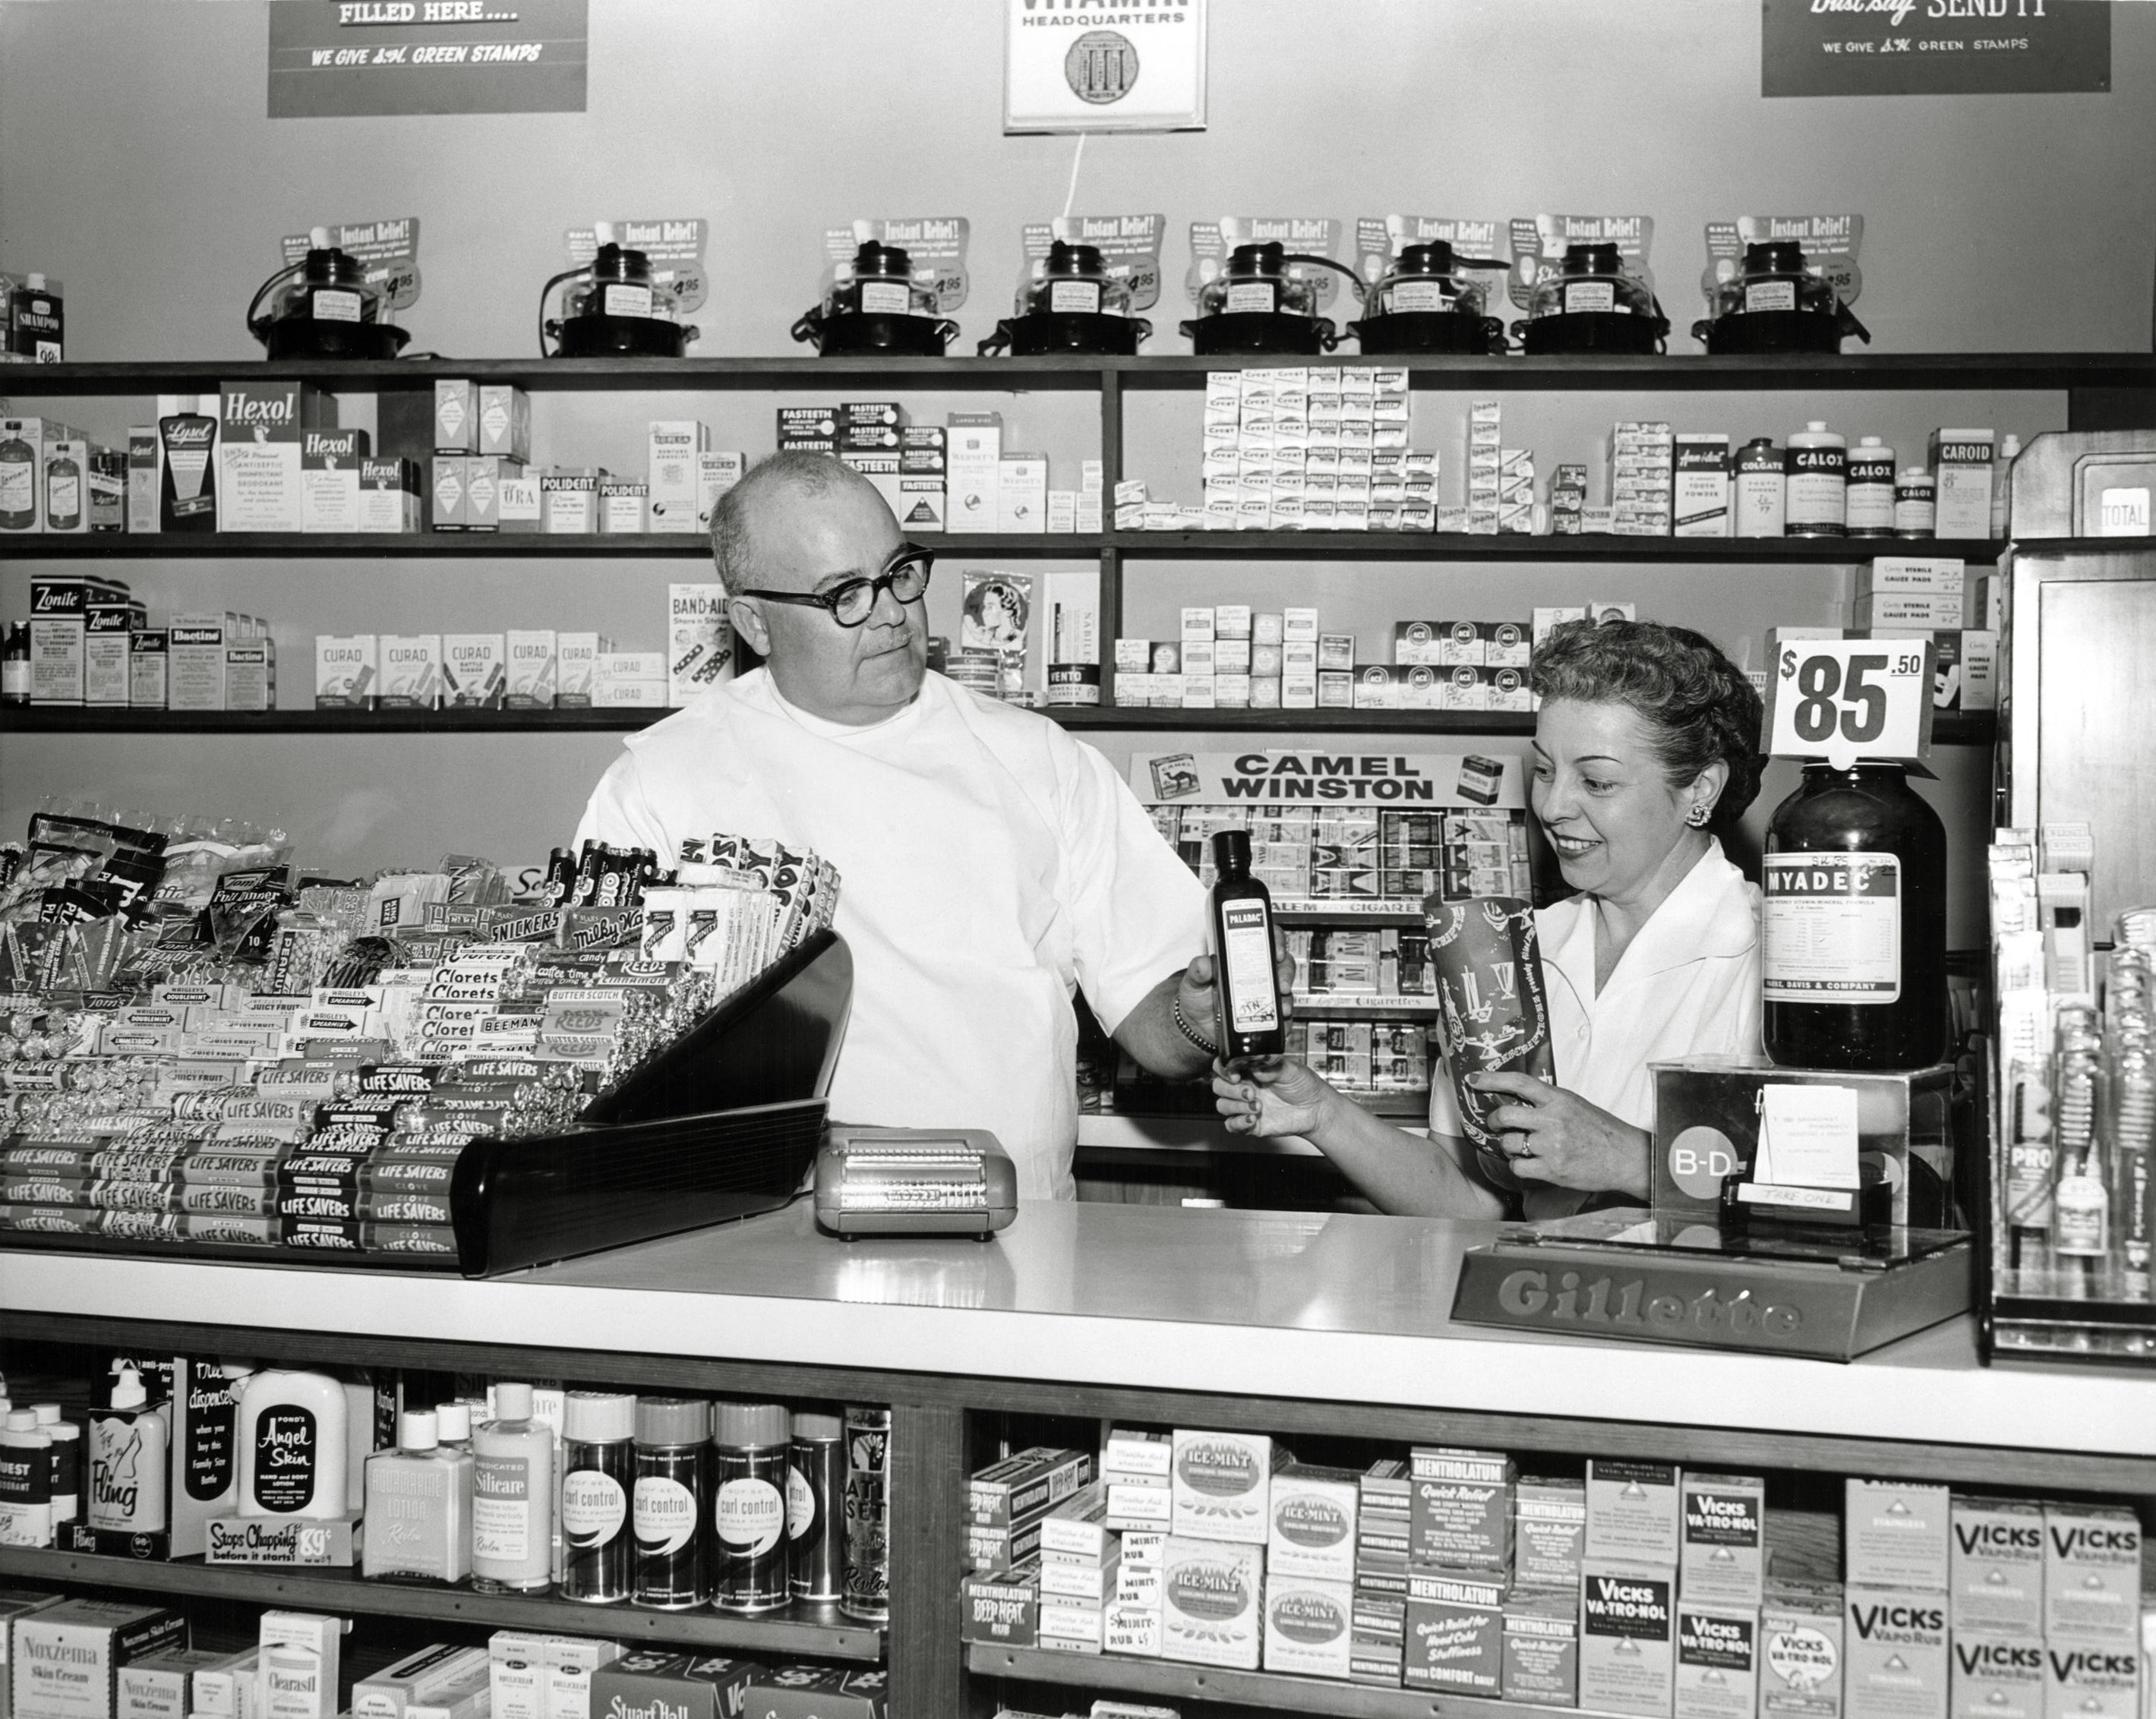 I purchased this 8 x 10 print at the swap meet. On the back is printed:
Mr. and Mrs. Cliff McCorkle, proprietors of the 101 Broadway Pharmacy, Richmond, Calif., getting an order ready for delivery. 5 November 1957. Photographer: Pfc. Barbara A. Warner, Sixth US Army Photo Lab, Presidio of San Francisco, Calif. Official US Army photograph. View full size.